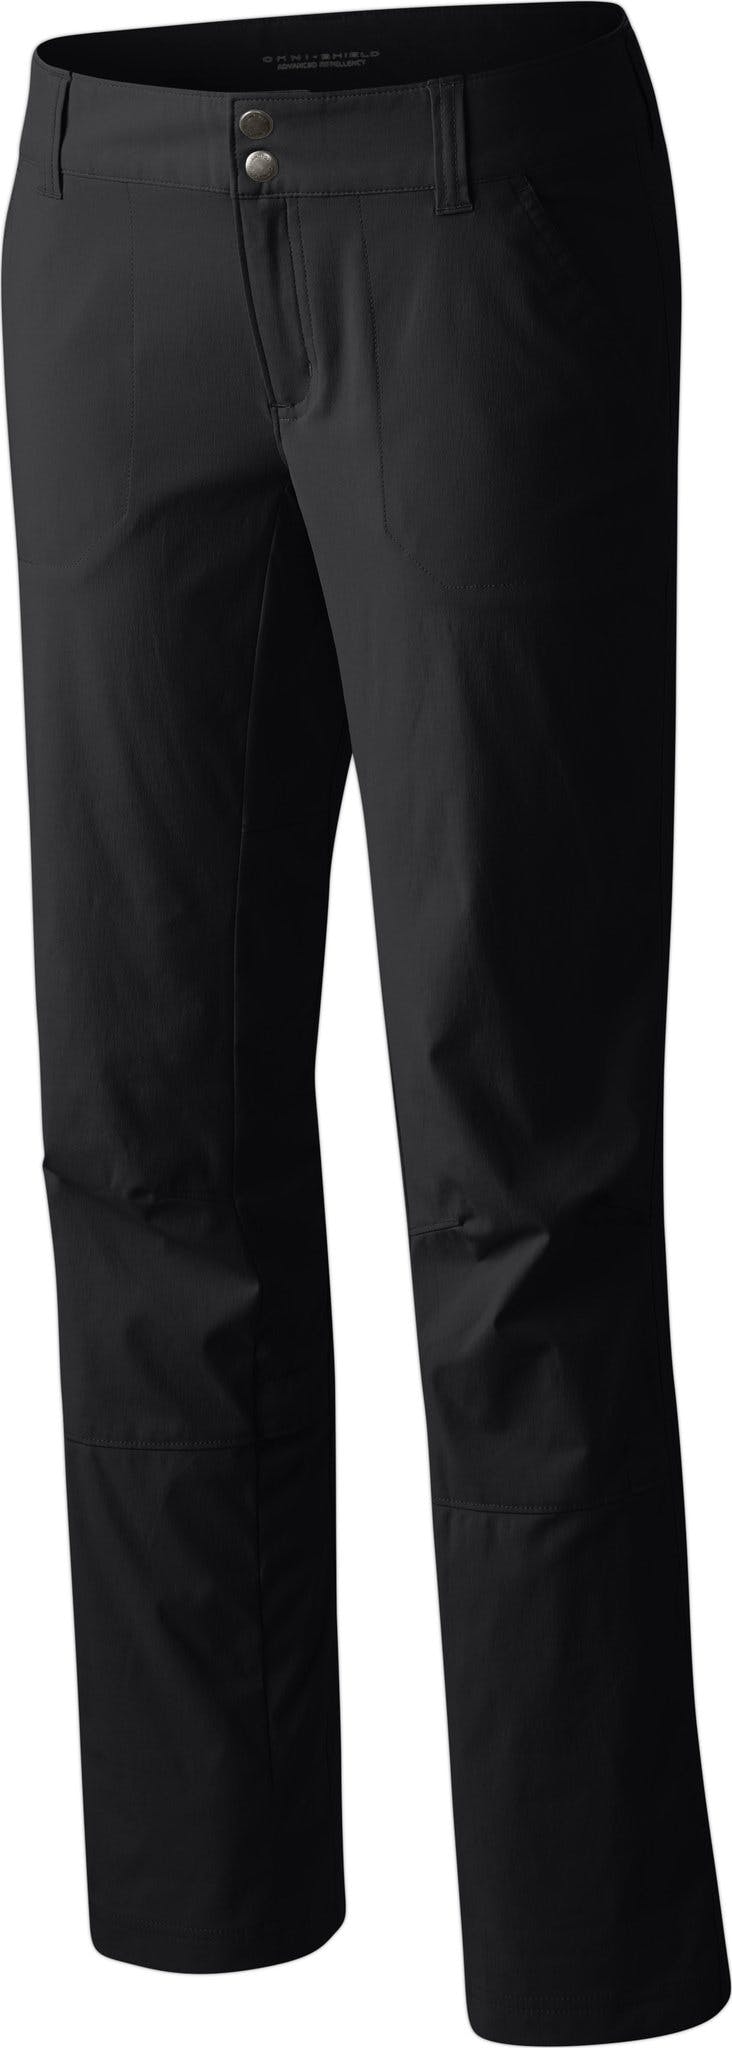 Product image for Saturday Trail Stretch Pant - Women's